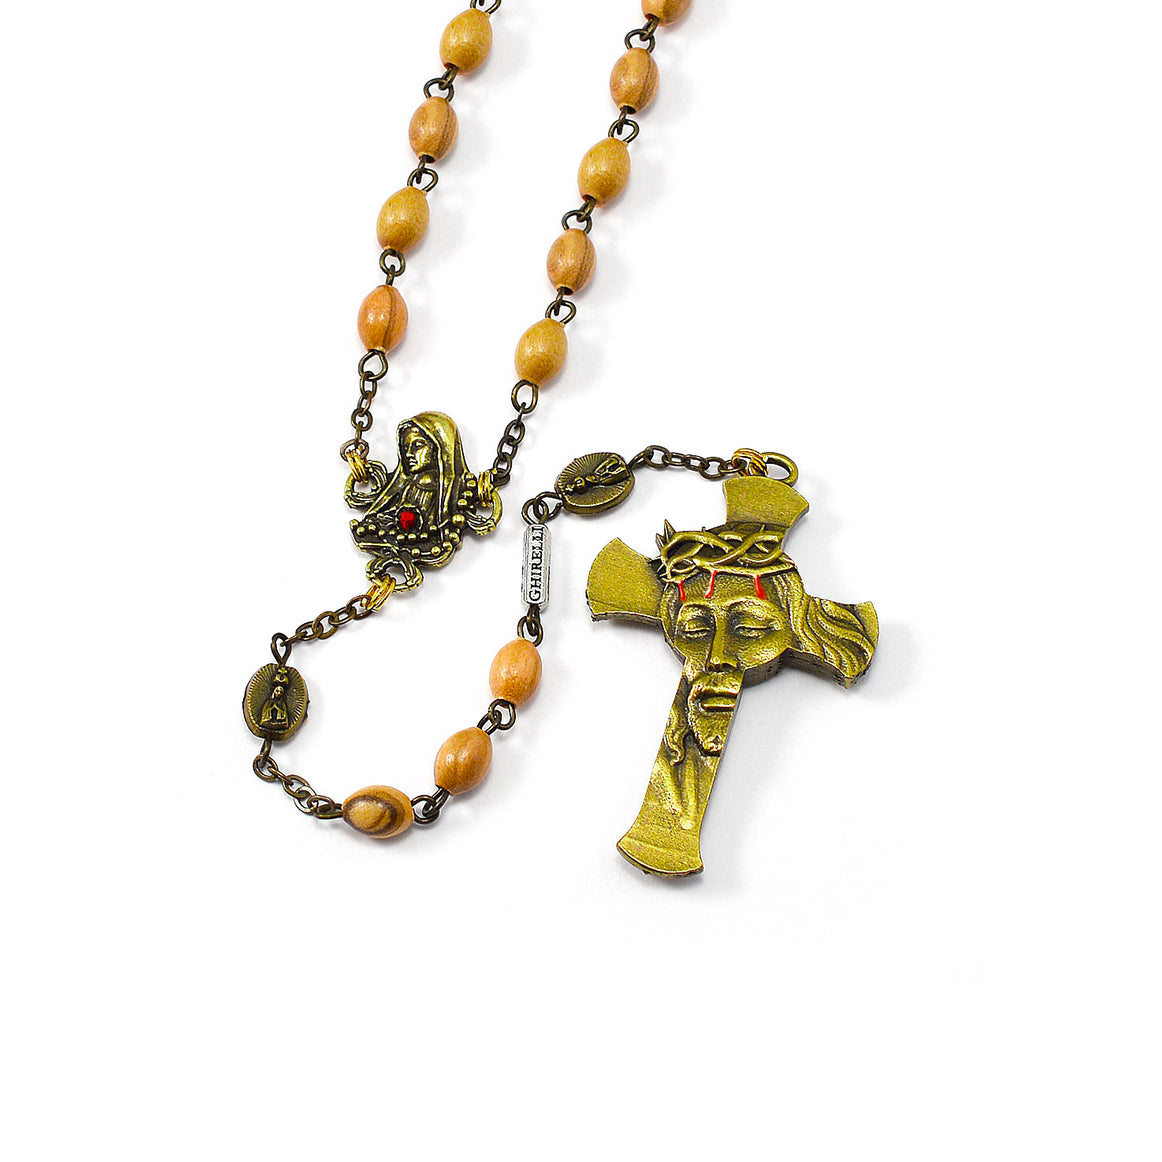 Our Lady of Fatima Rosary with Italian Olivewood Beads